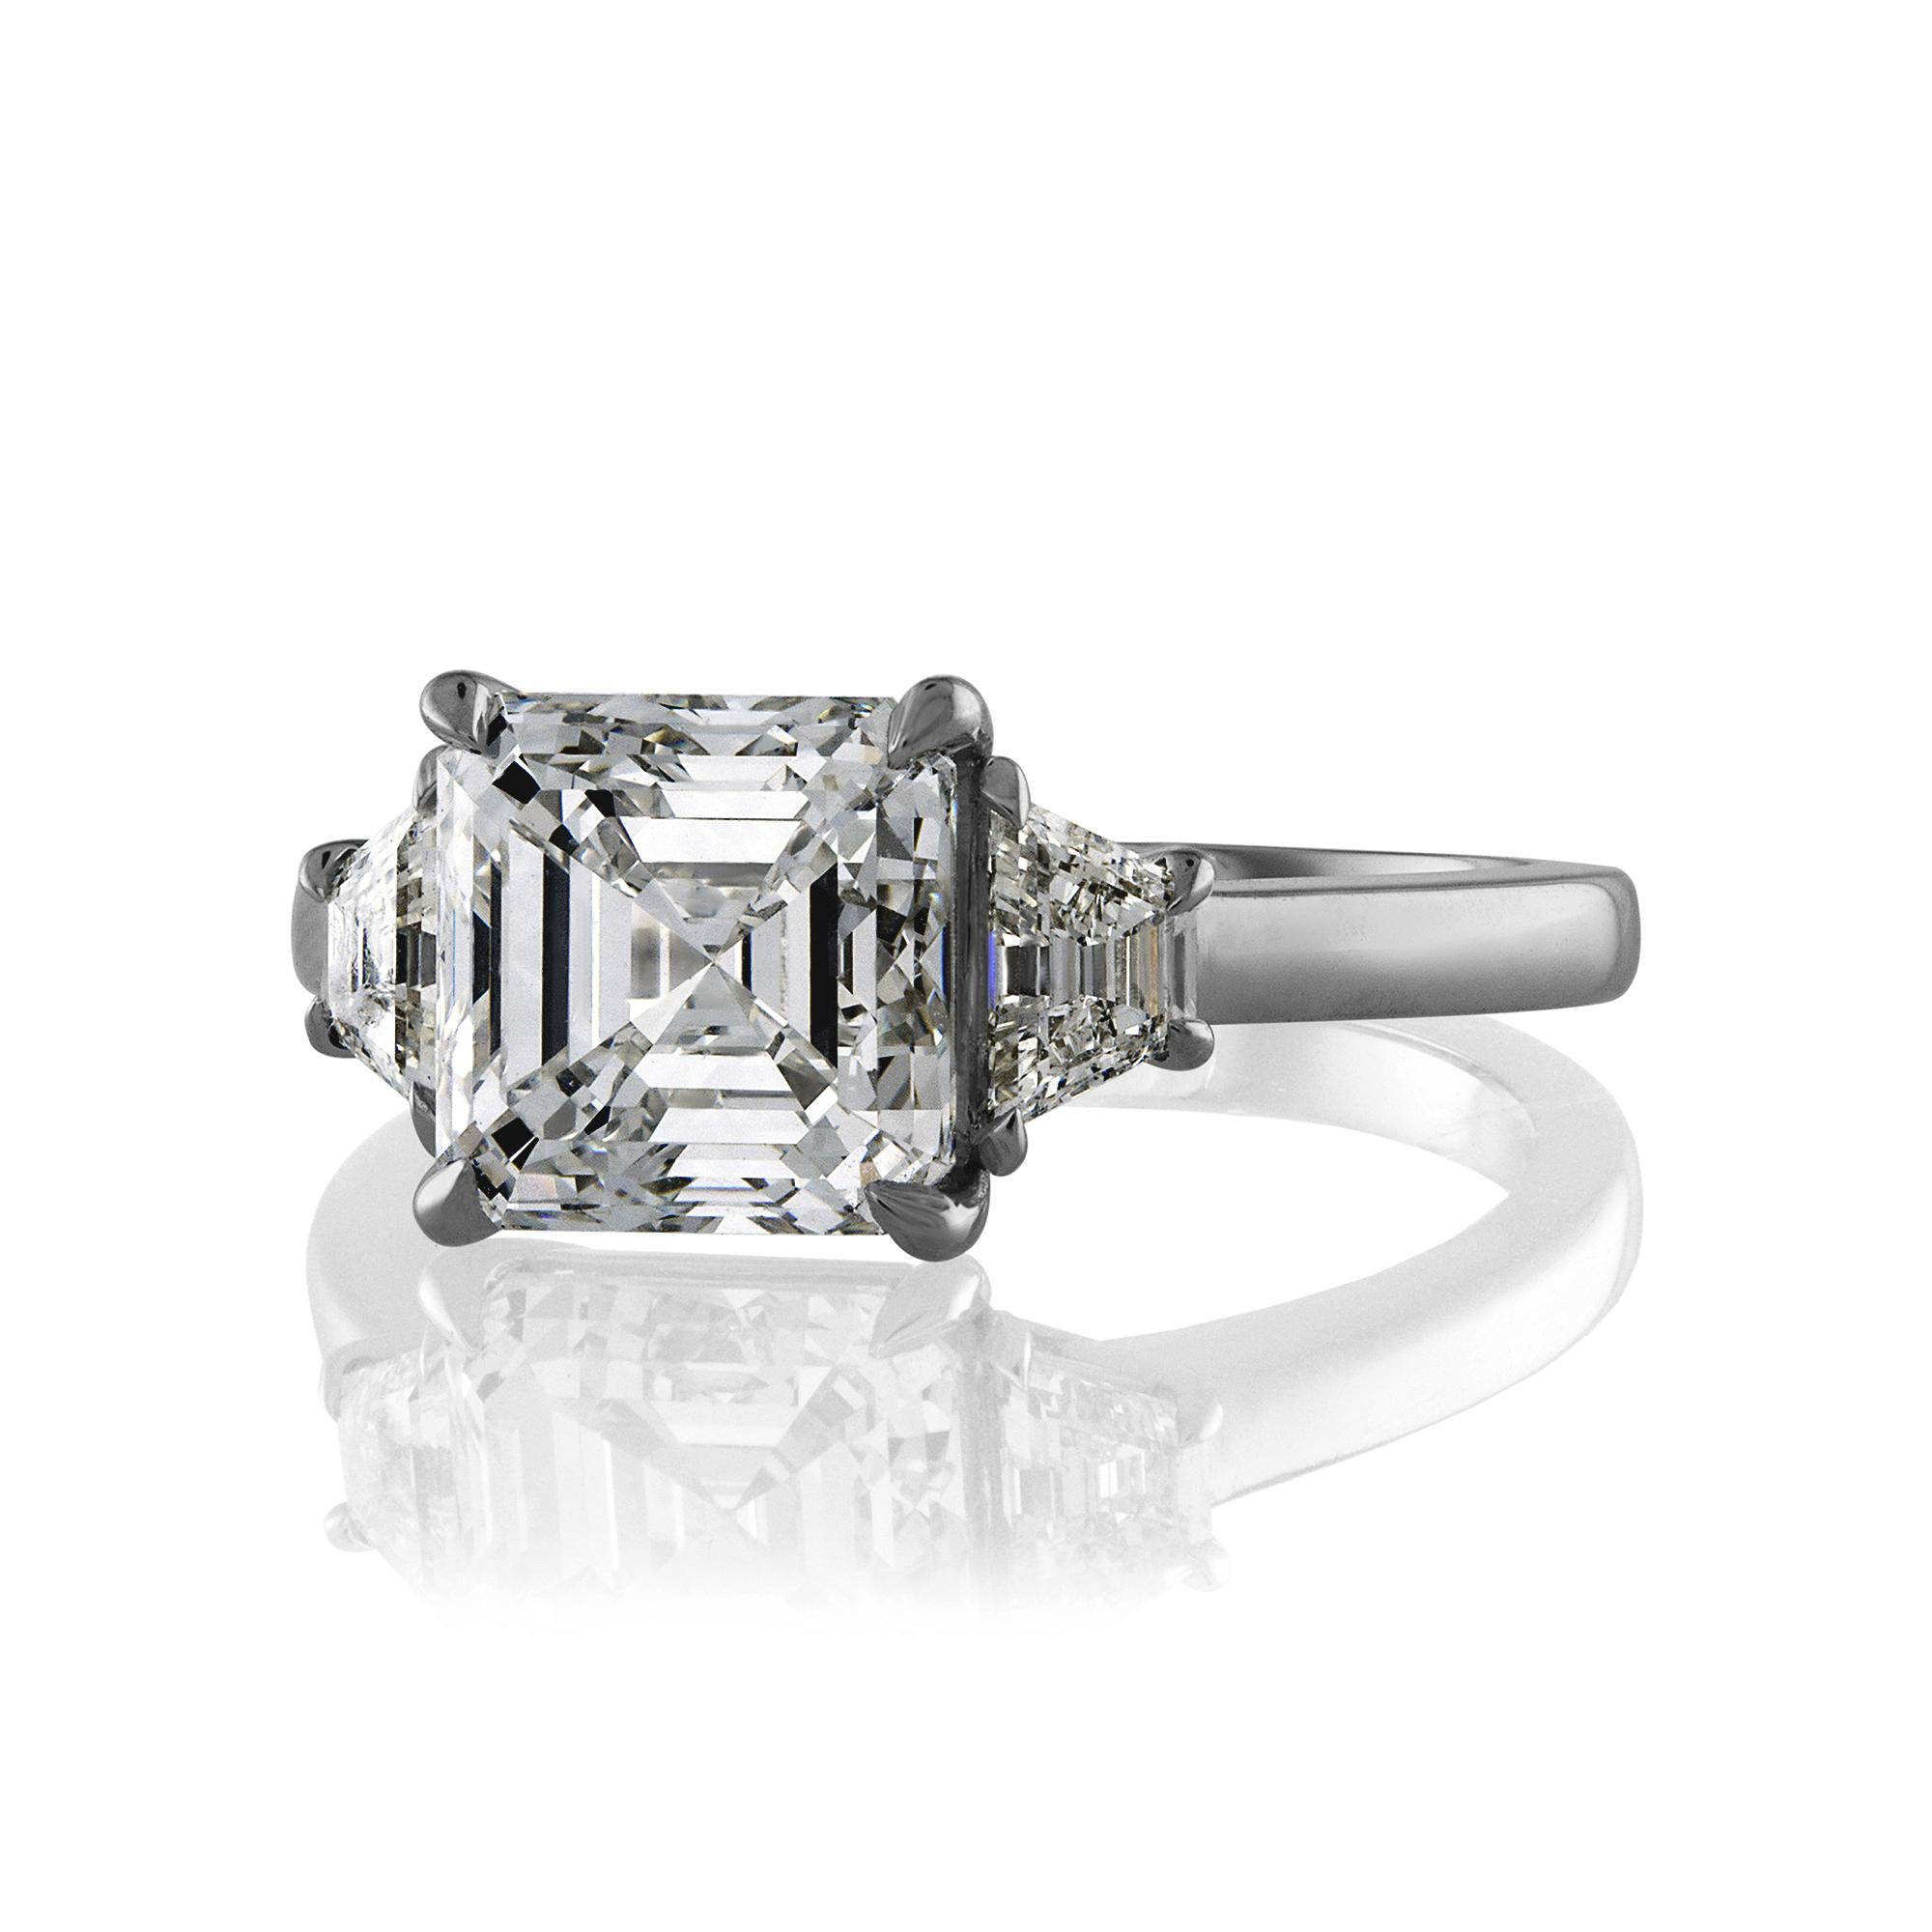 Timeless Estate GIA 3.47ct Asscher Cut Diamond Engagement Anniversary 3 Stone Platinum Ring.

This Impressive ring will take your breath away! Once in a lifetime opportunity to own a HUGE 100% NATURAL NONE-treated diamond for a fraction of the